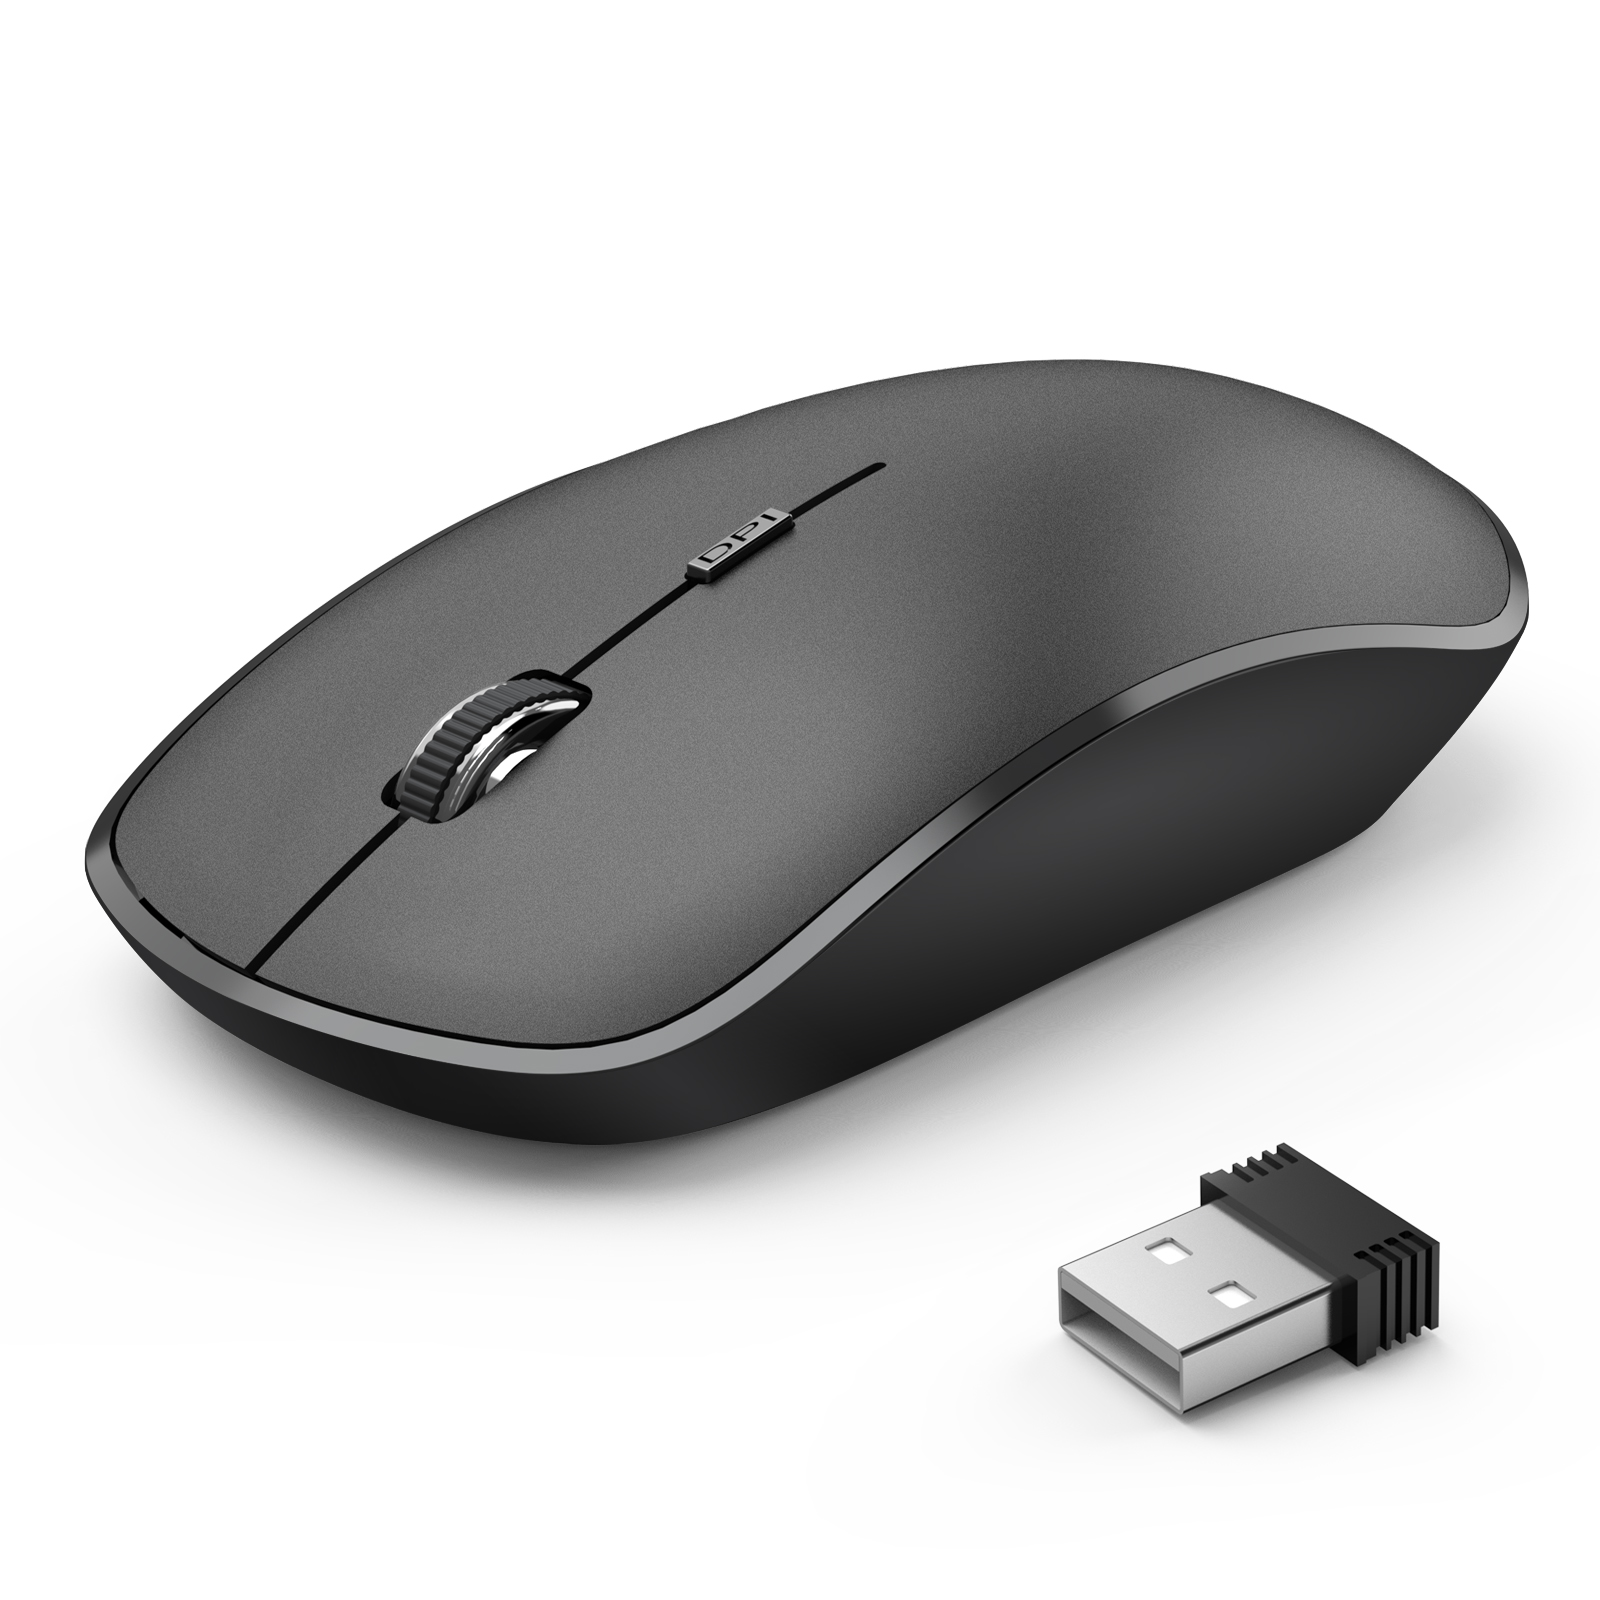 Wireless Mouse for Laptop,J JOYACCESS 2.4G Ultra Thin Silent Mouse with USB Receiver, 2400 DPI Portable Mobile Optical Cordless Mouse for Laptop, Computer, MacBook,Window, Chromebook, PC-Black